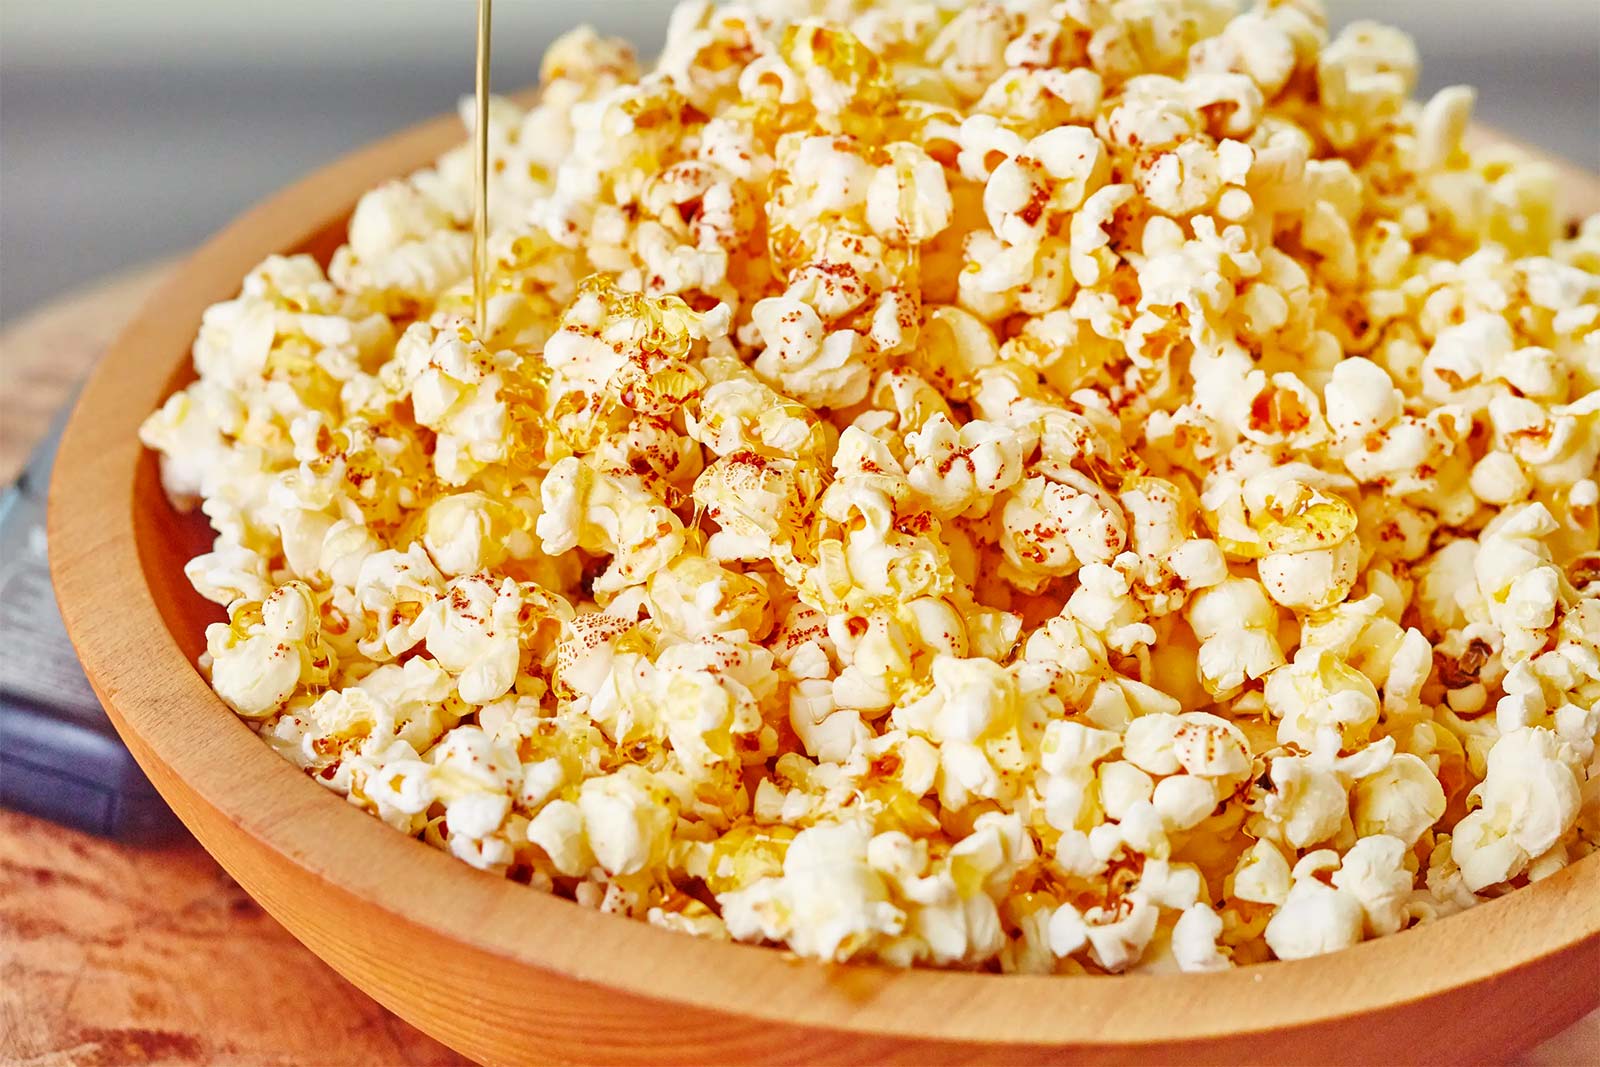 🍅 If You Eat 17/33 of These Foods With Ketchup, Then You’re a Monster Popcorn